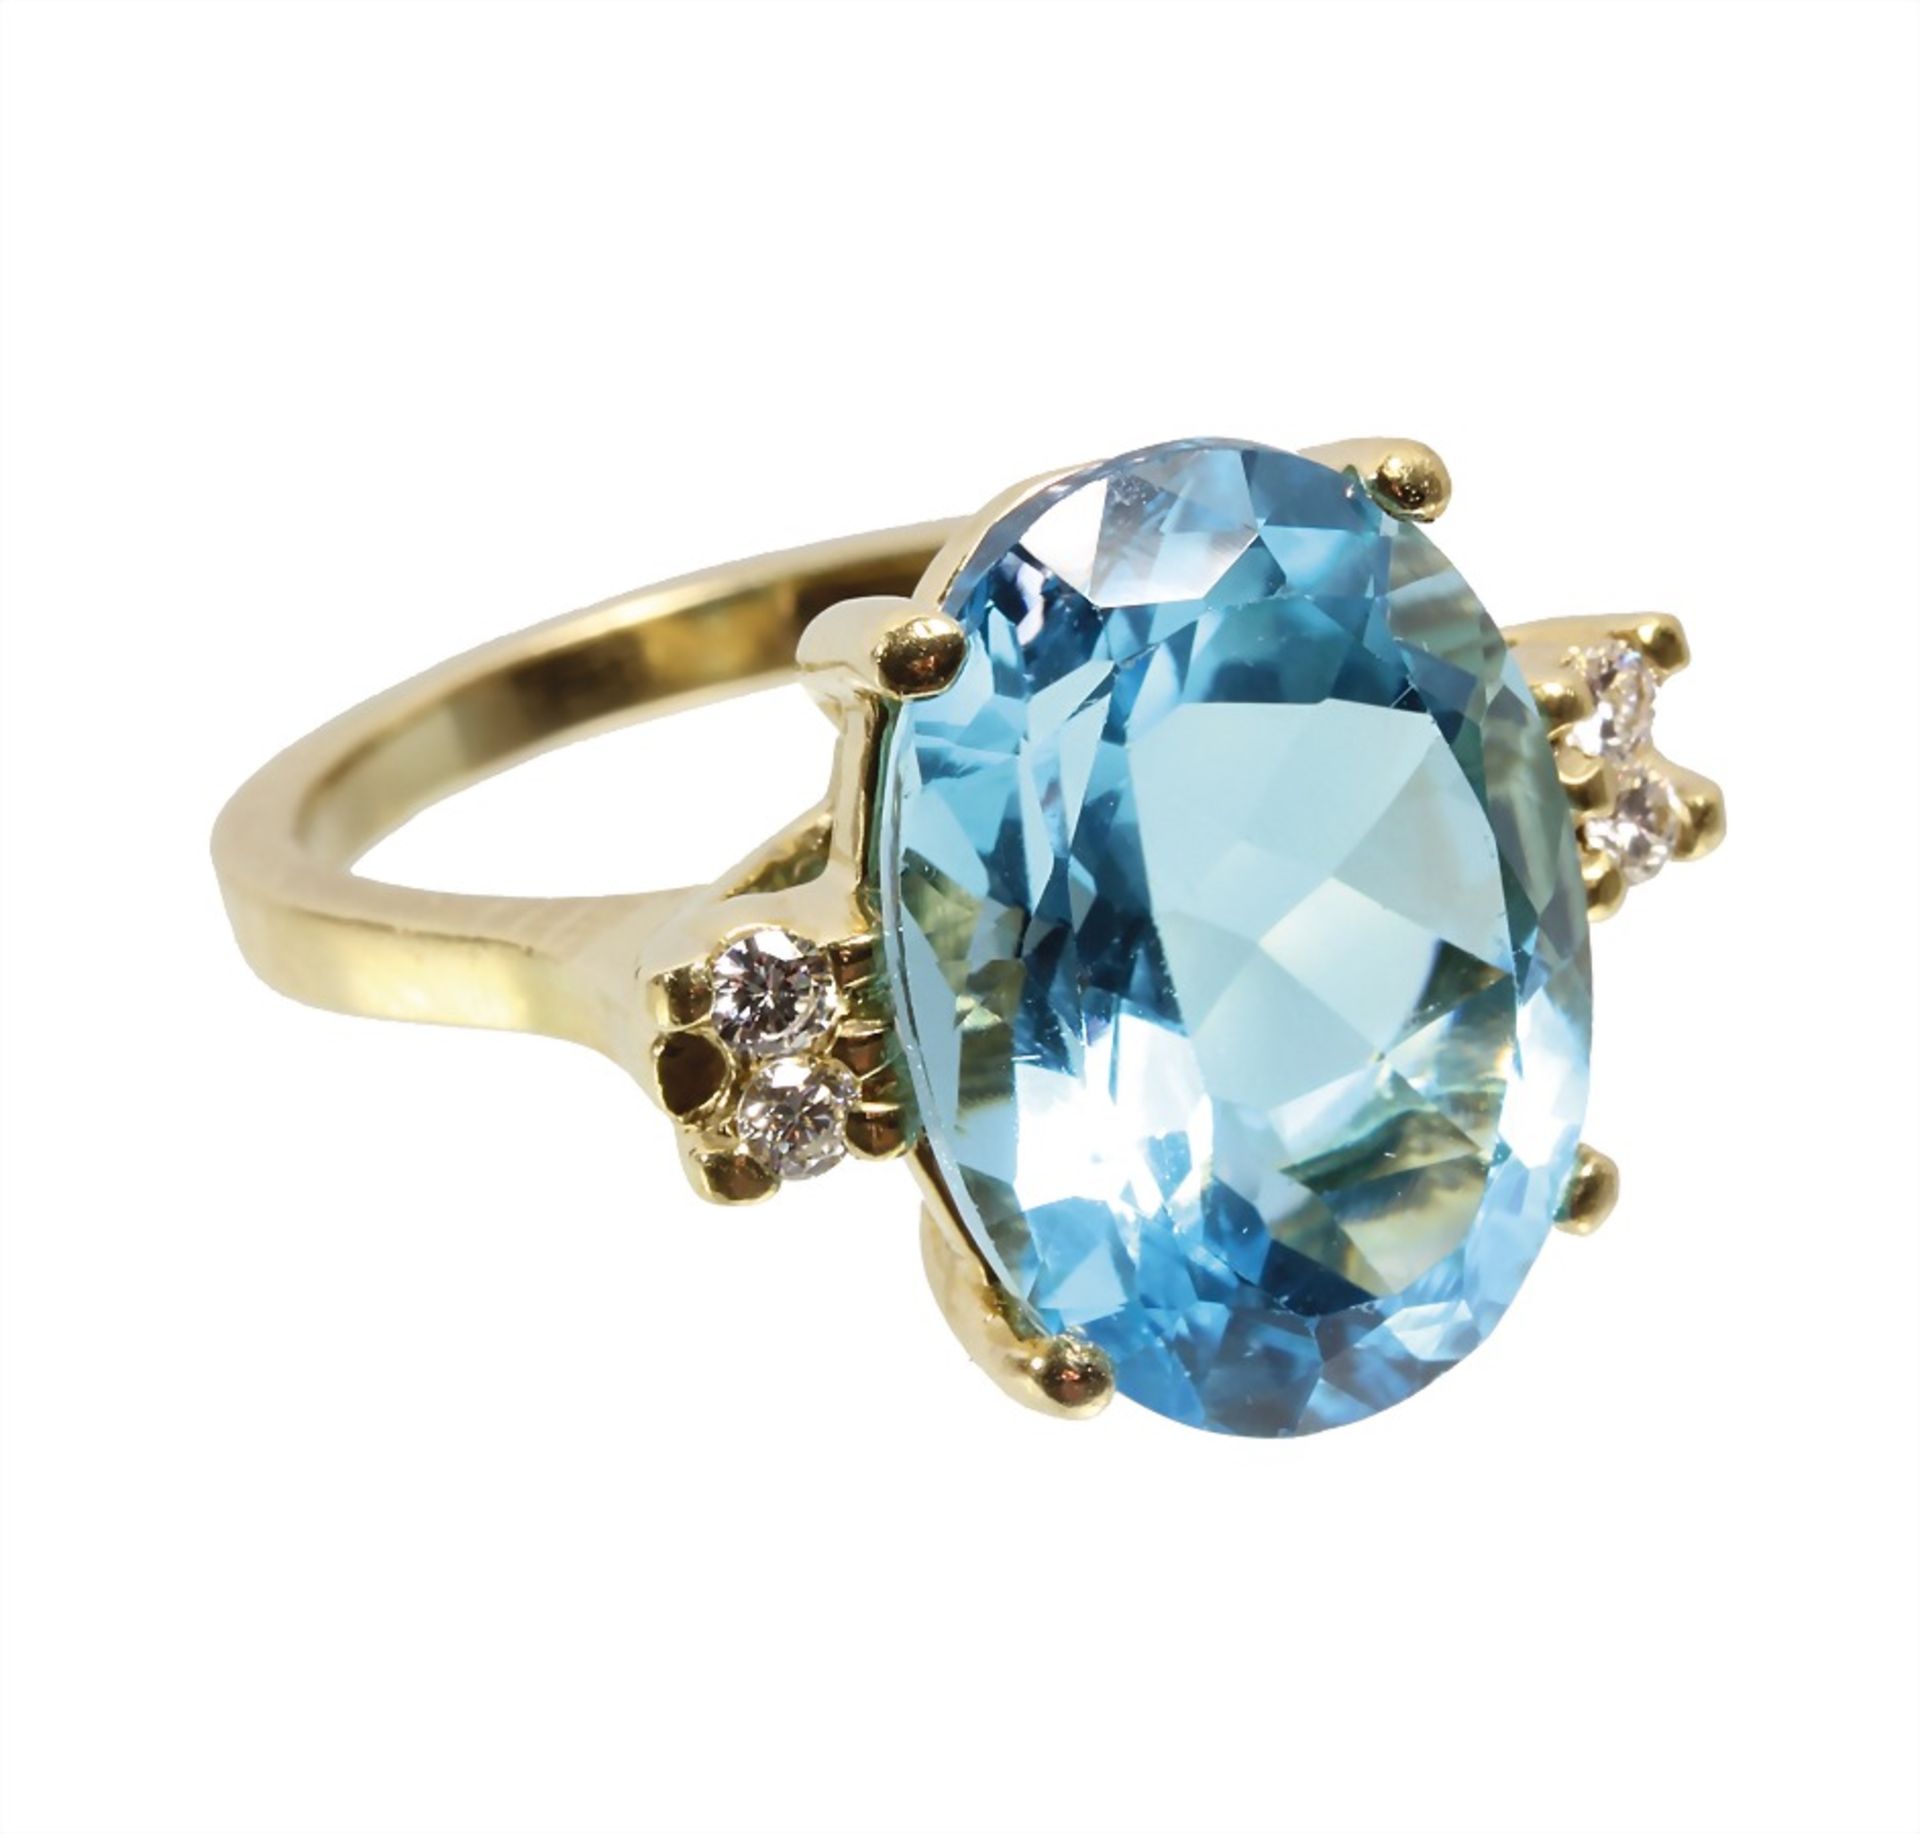 ring, H. STERN, yellow gold 750/000, blue topaz (faceted), c. 15,5 ct, 4 brilliants, c. 0.18 ...